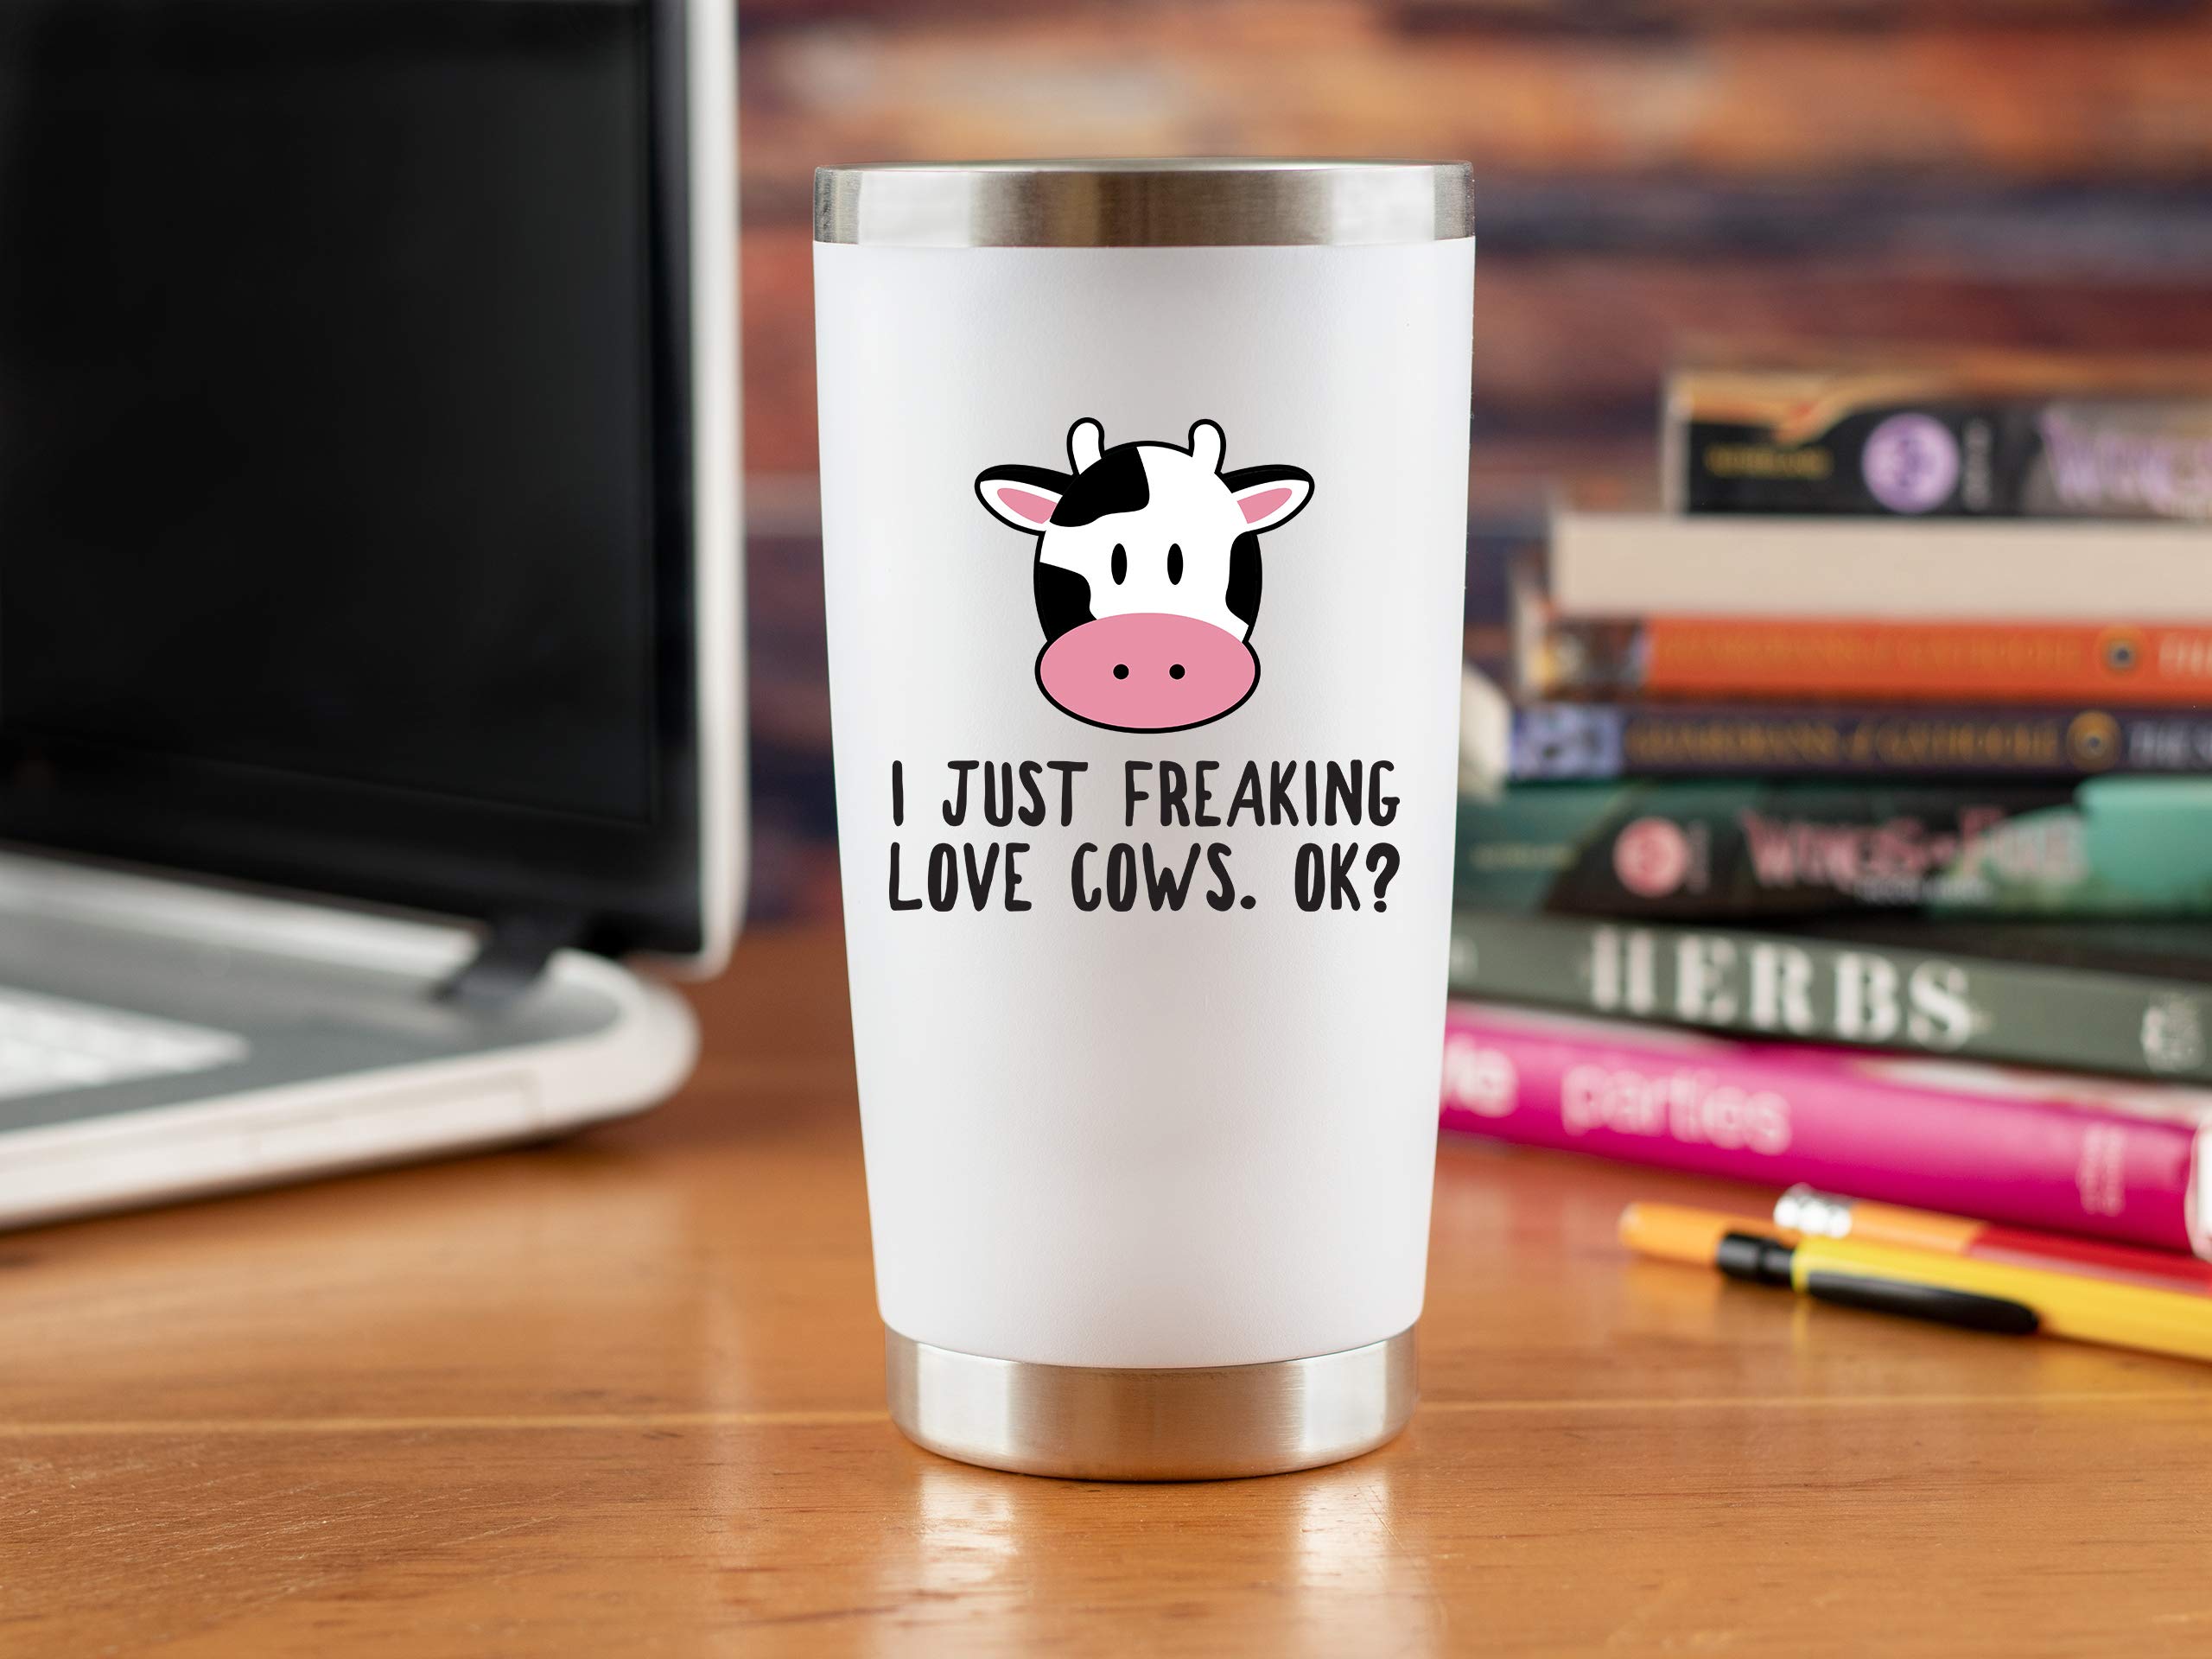 KLUBI Cow Gifts Coffee Tumbler- 20oz Tumbler for Coffee or Wine - Gift Idea for Cow Lovers, Themed Gifts, Print, Cup, Accessories, Stuff, Farm Animal